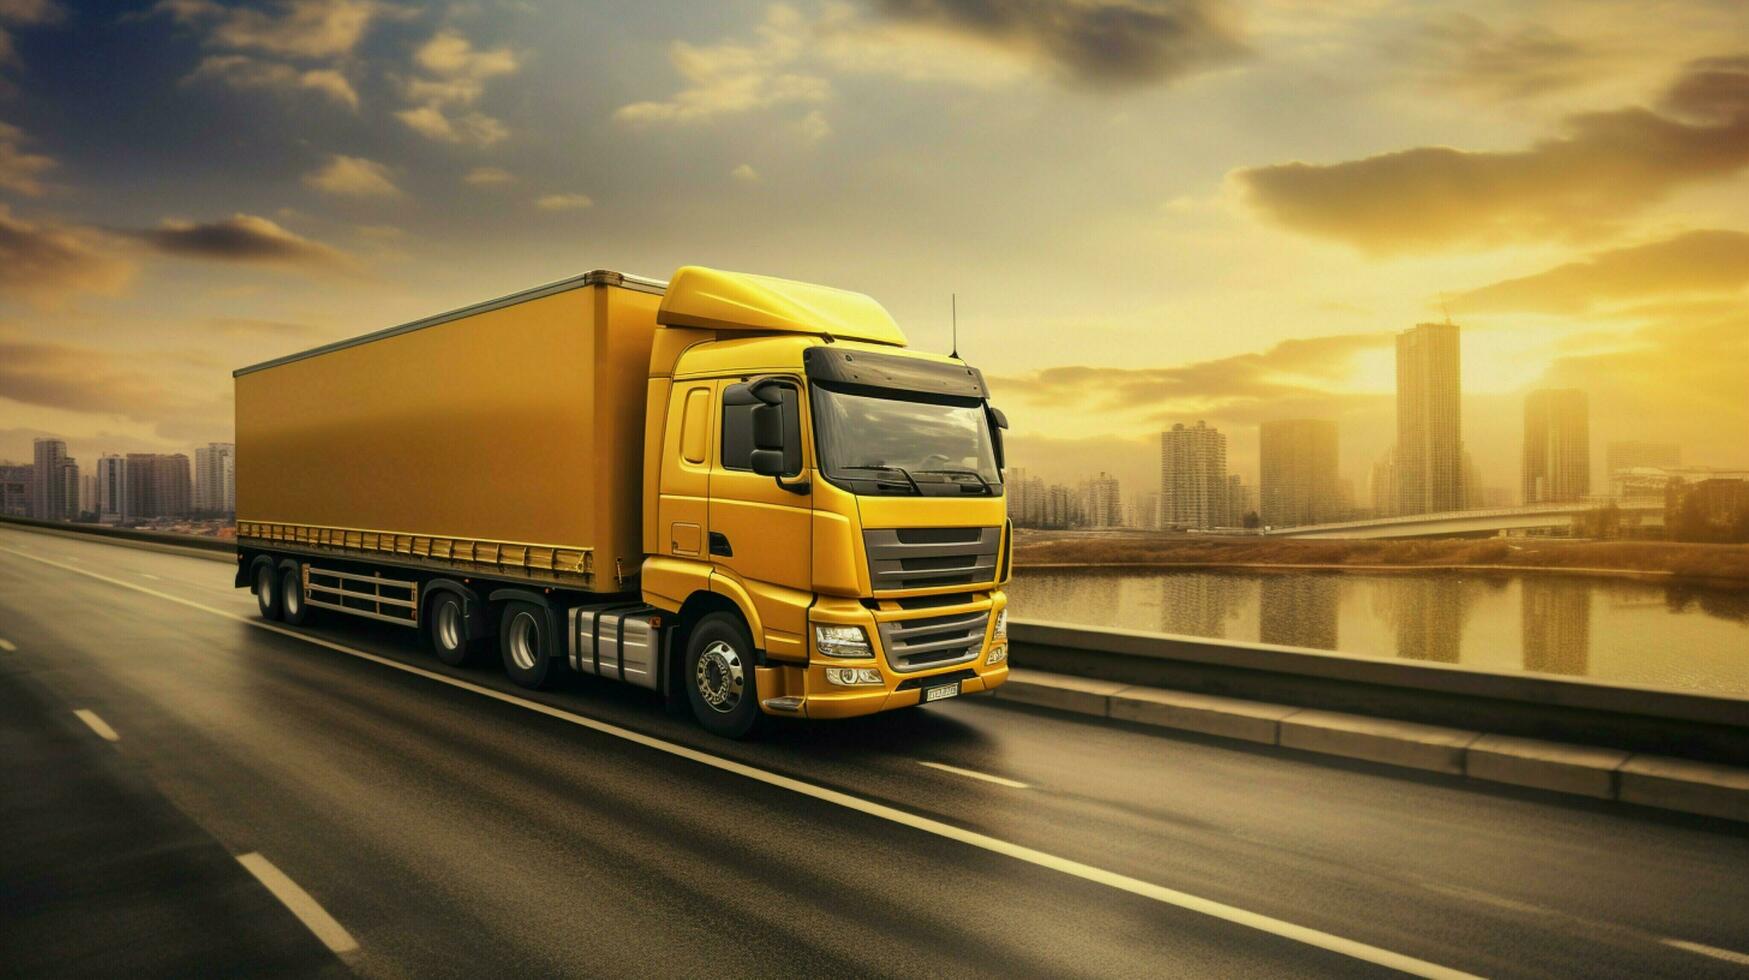 freight transportation industry delivers cargo using truck photo